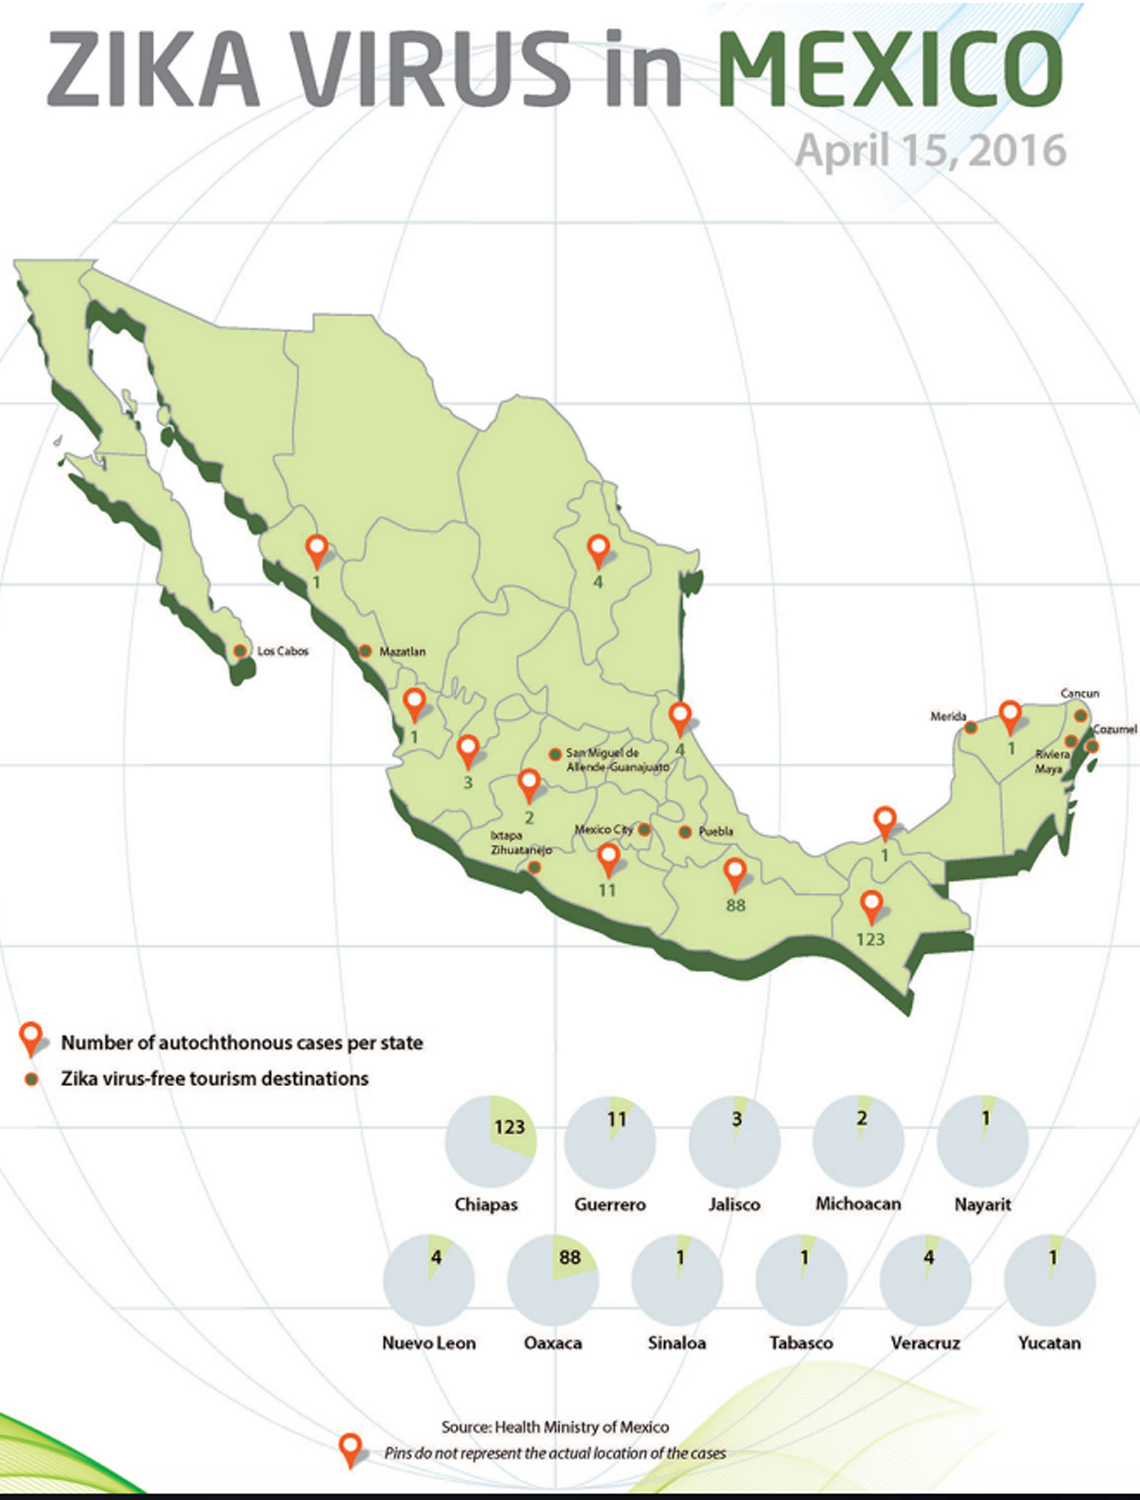 zika virus in mexico map The Zika Virus In Mexico What You Need To Know Journey Mexico zika virus in mexico map